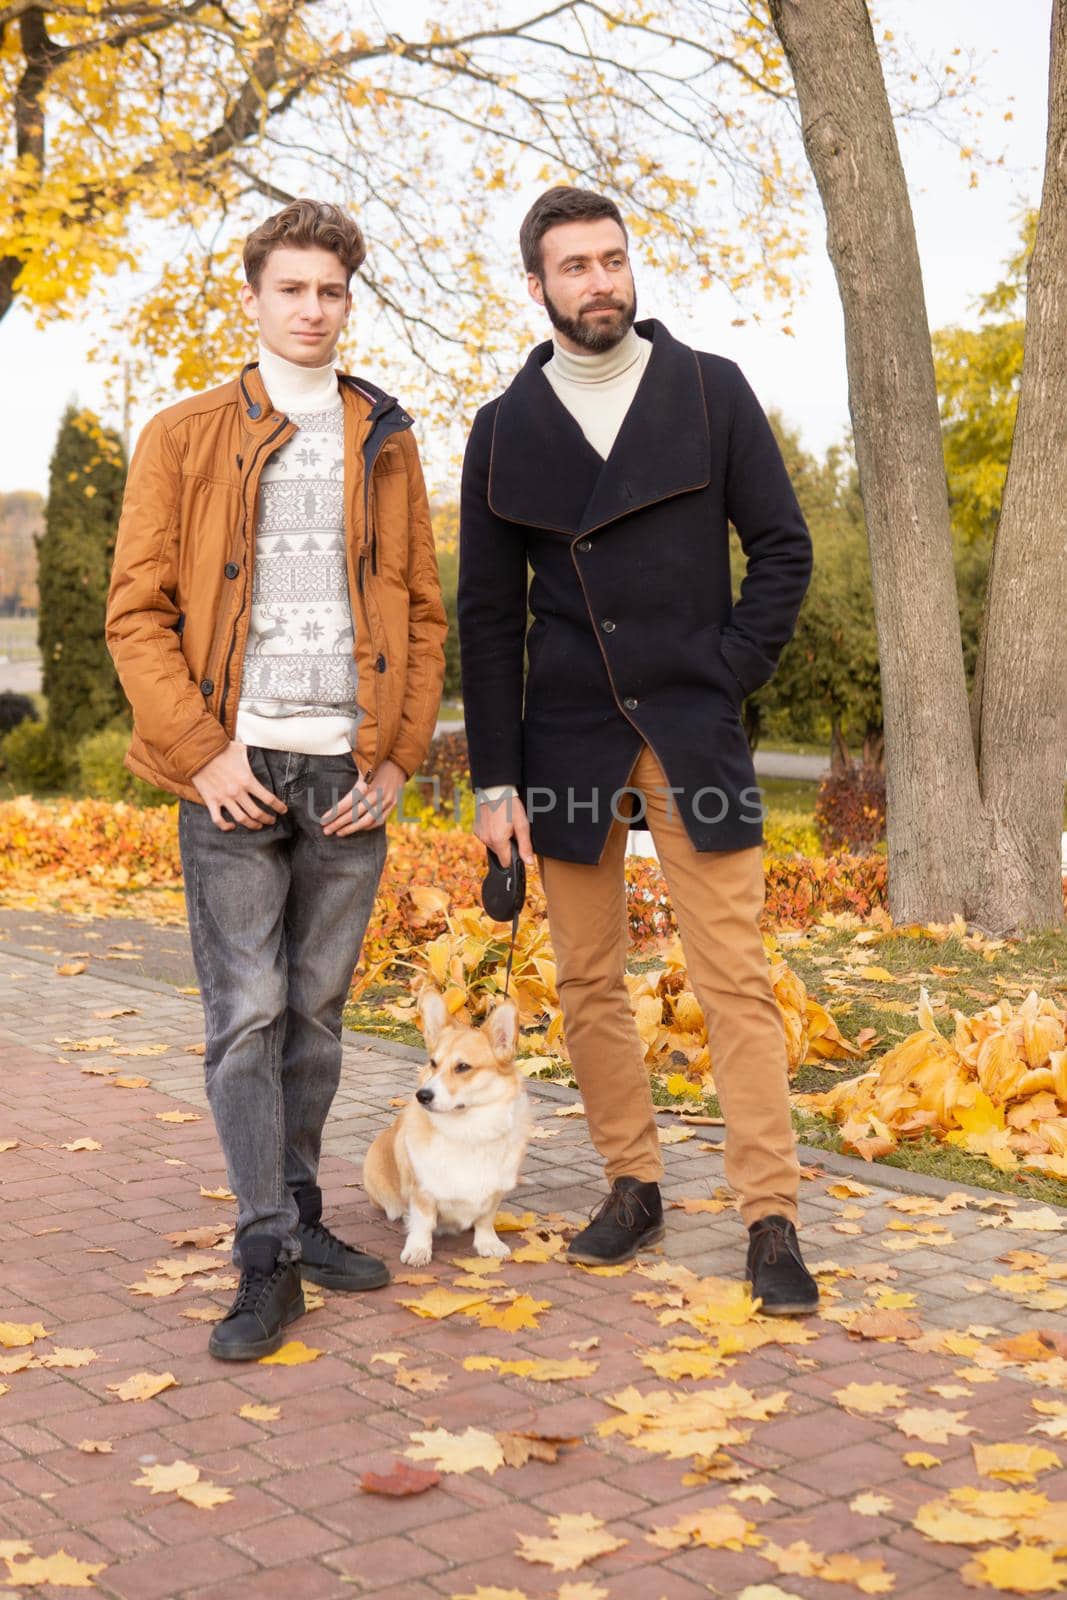 Father and son with a pet on a walk in the autumn park by Annu1tochka